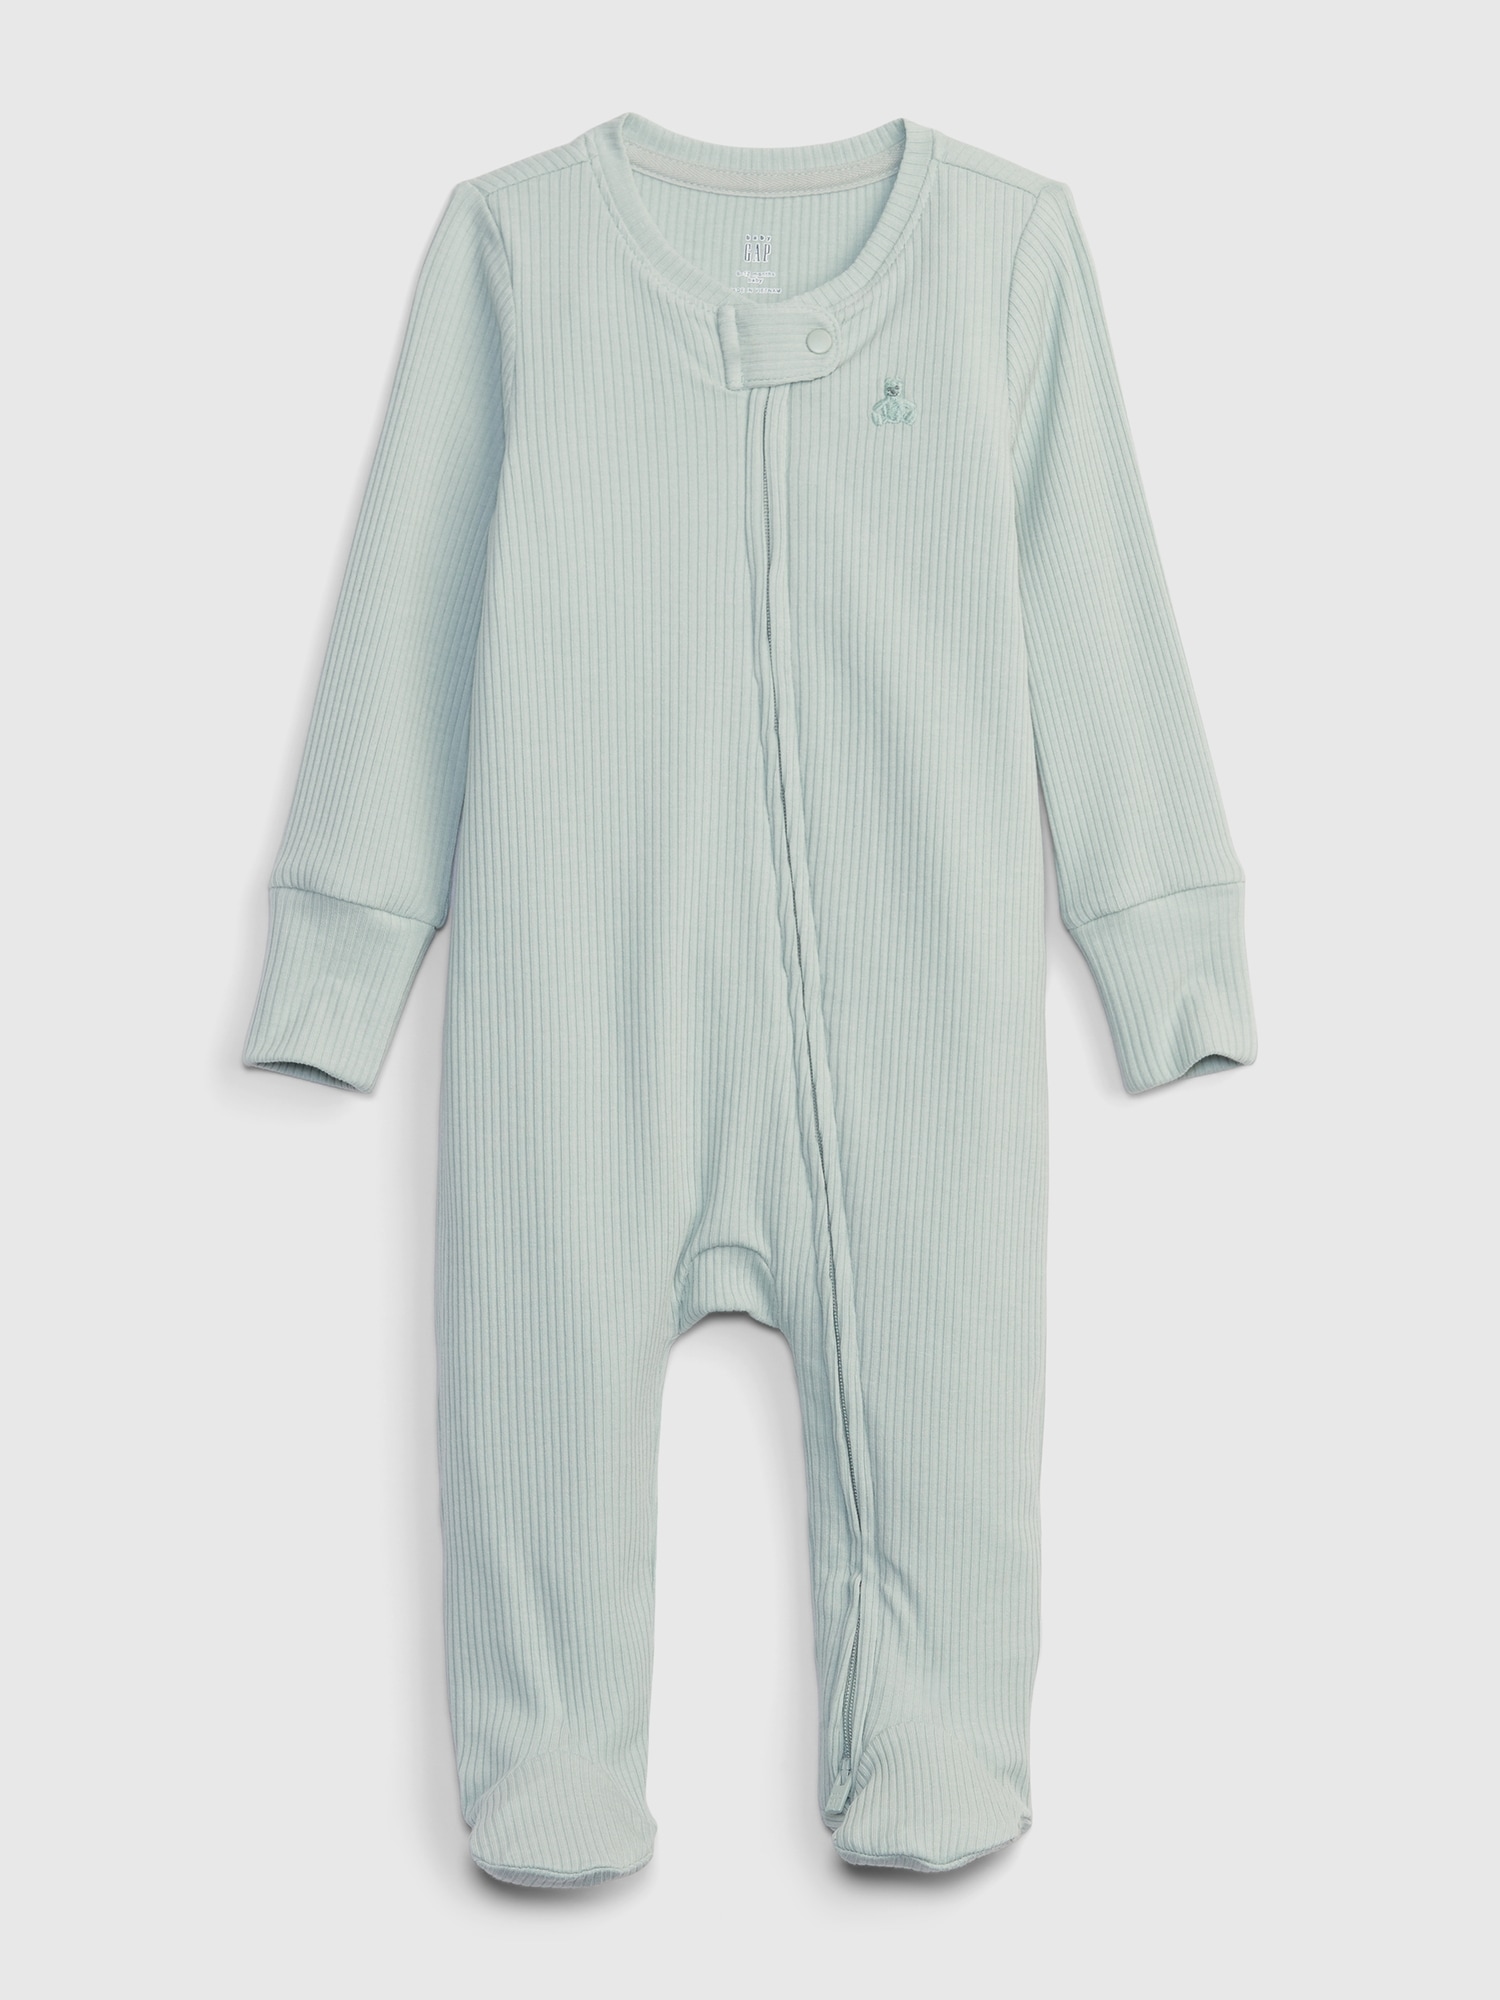 Gap Kids' Baby First Favorites Tinyrib Footed One-piece In Frothy Aqua Blue